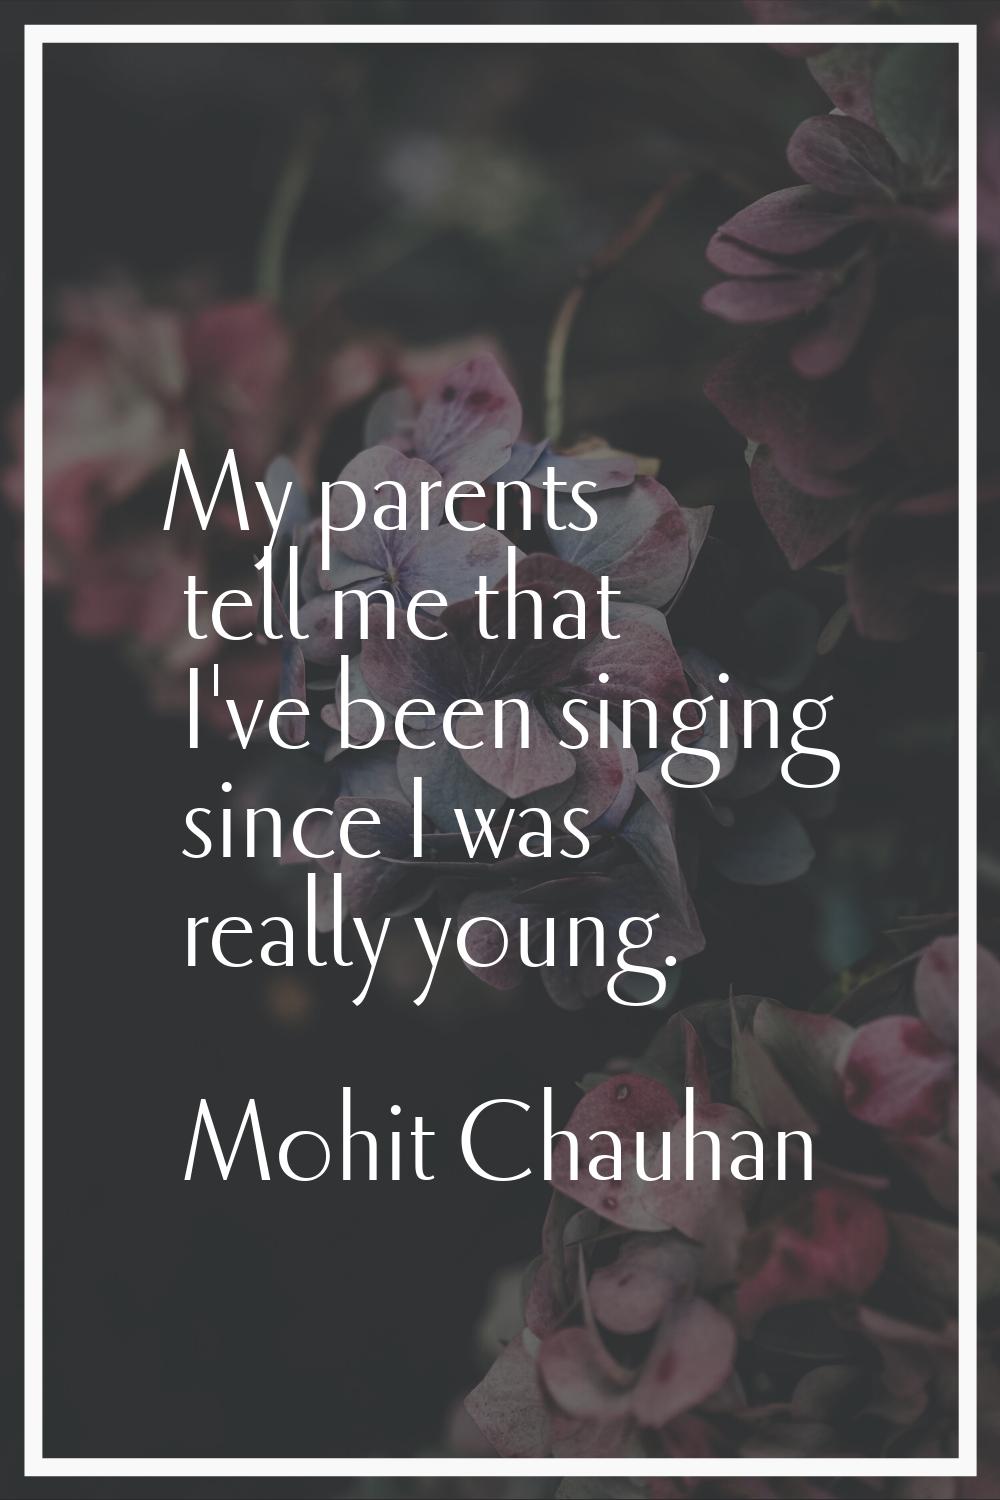 My parents tell me that I've been singing since I was really young.